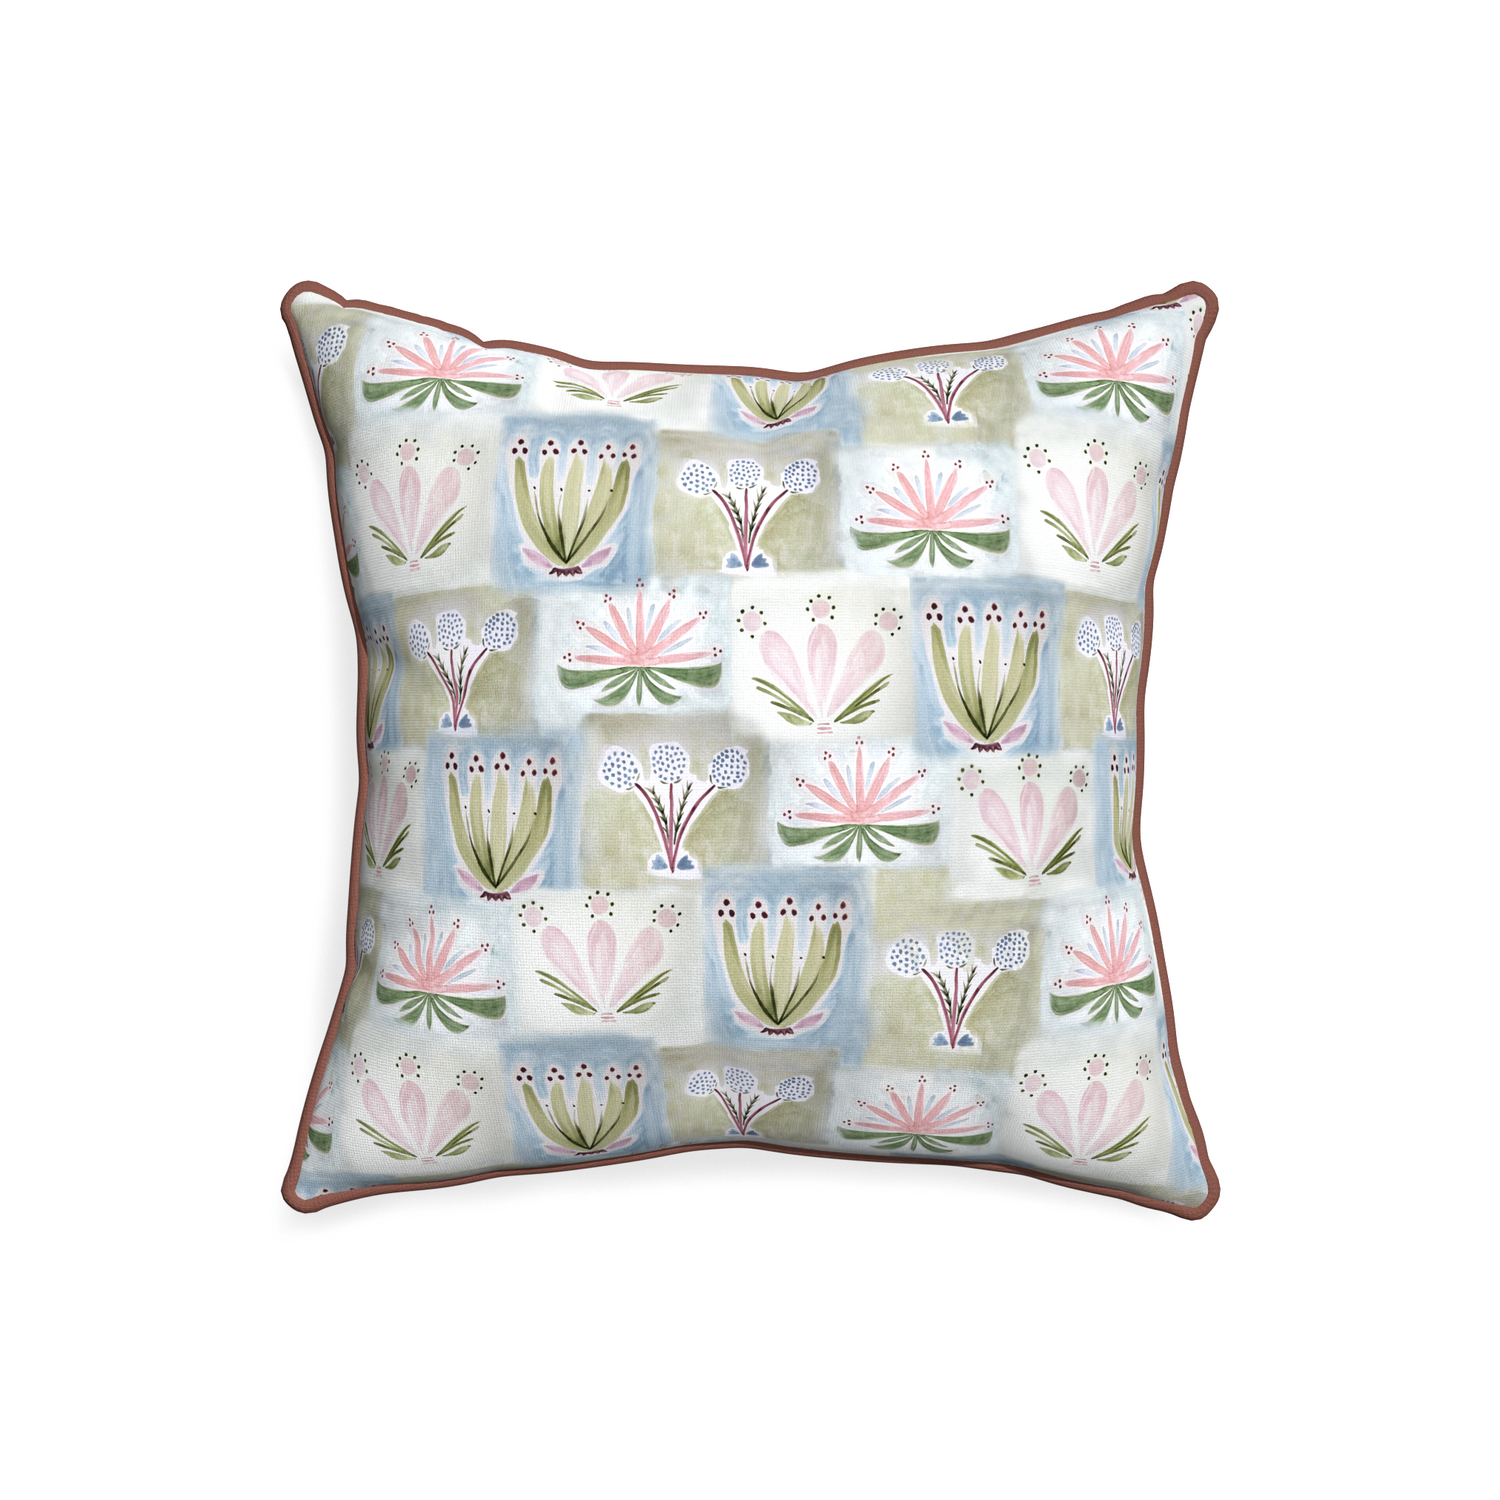 20-square harper custom hand-painted floralpillow with w piping on white background